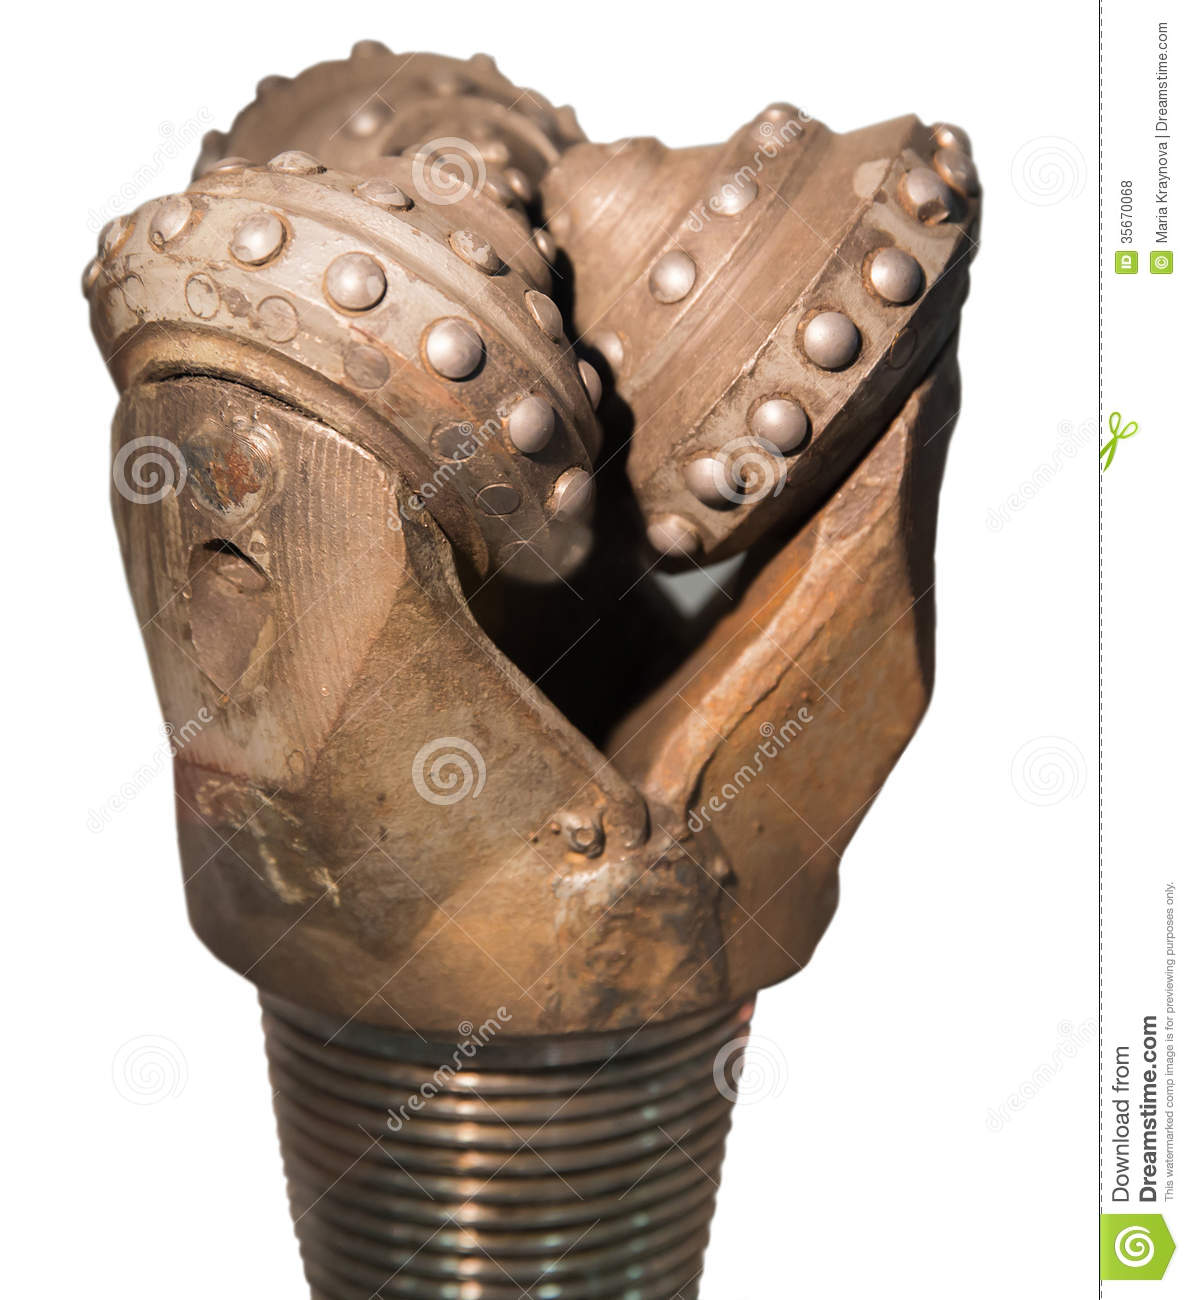 Oil Rig Drill Bit Royalty Free Stock Photos   Image  35670068